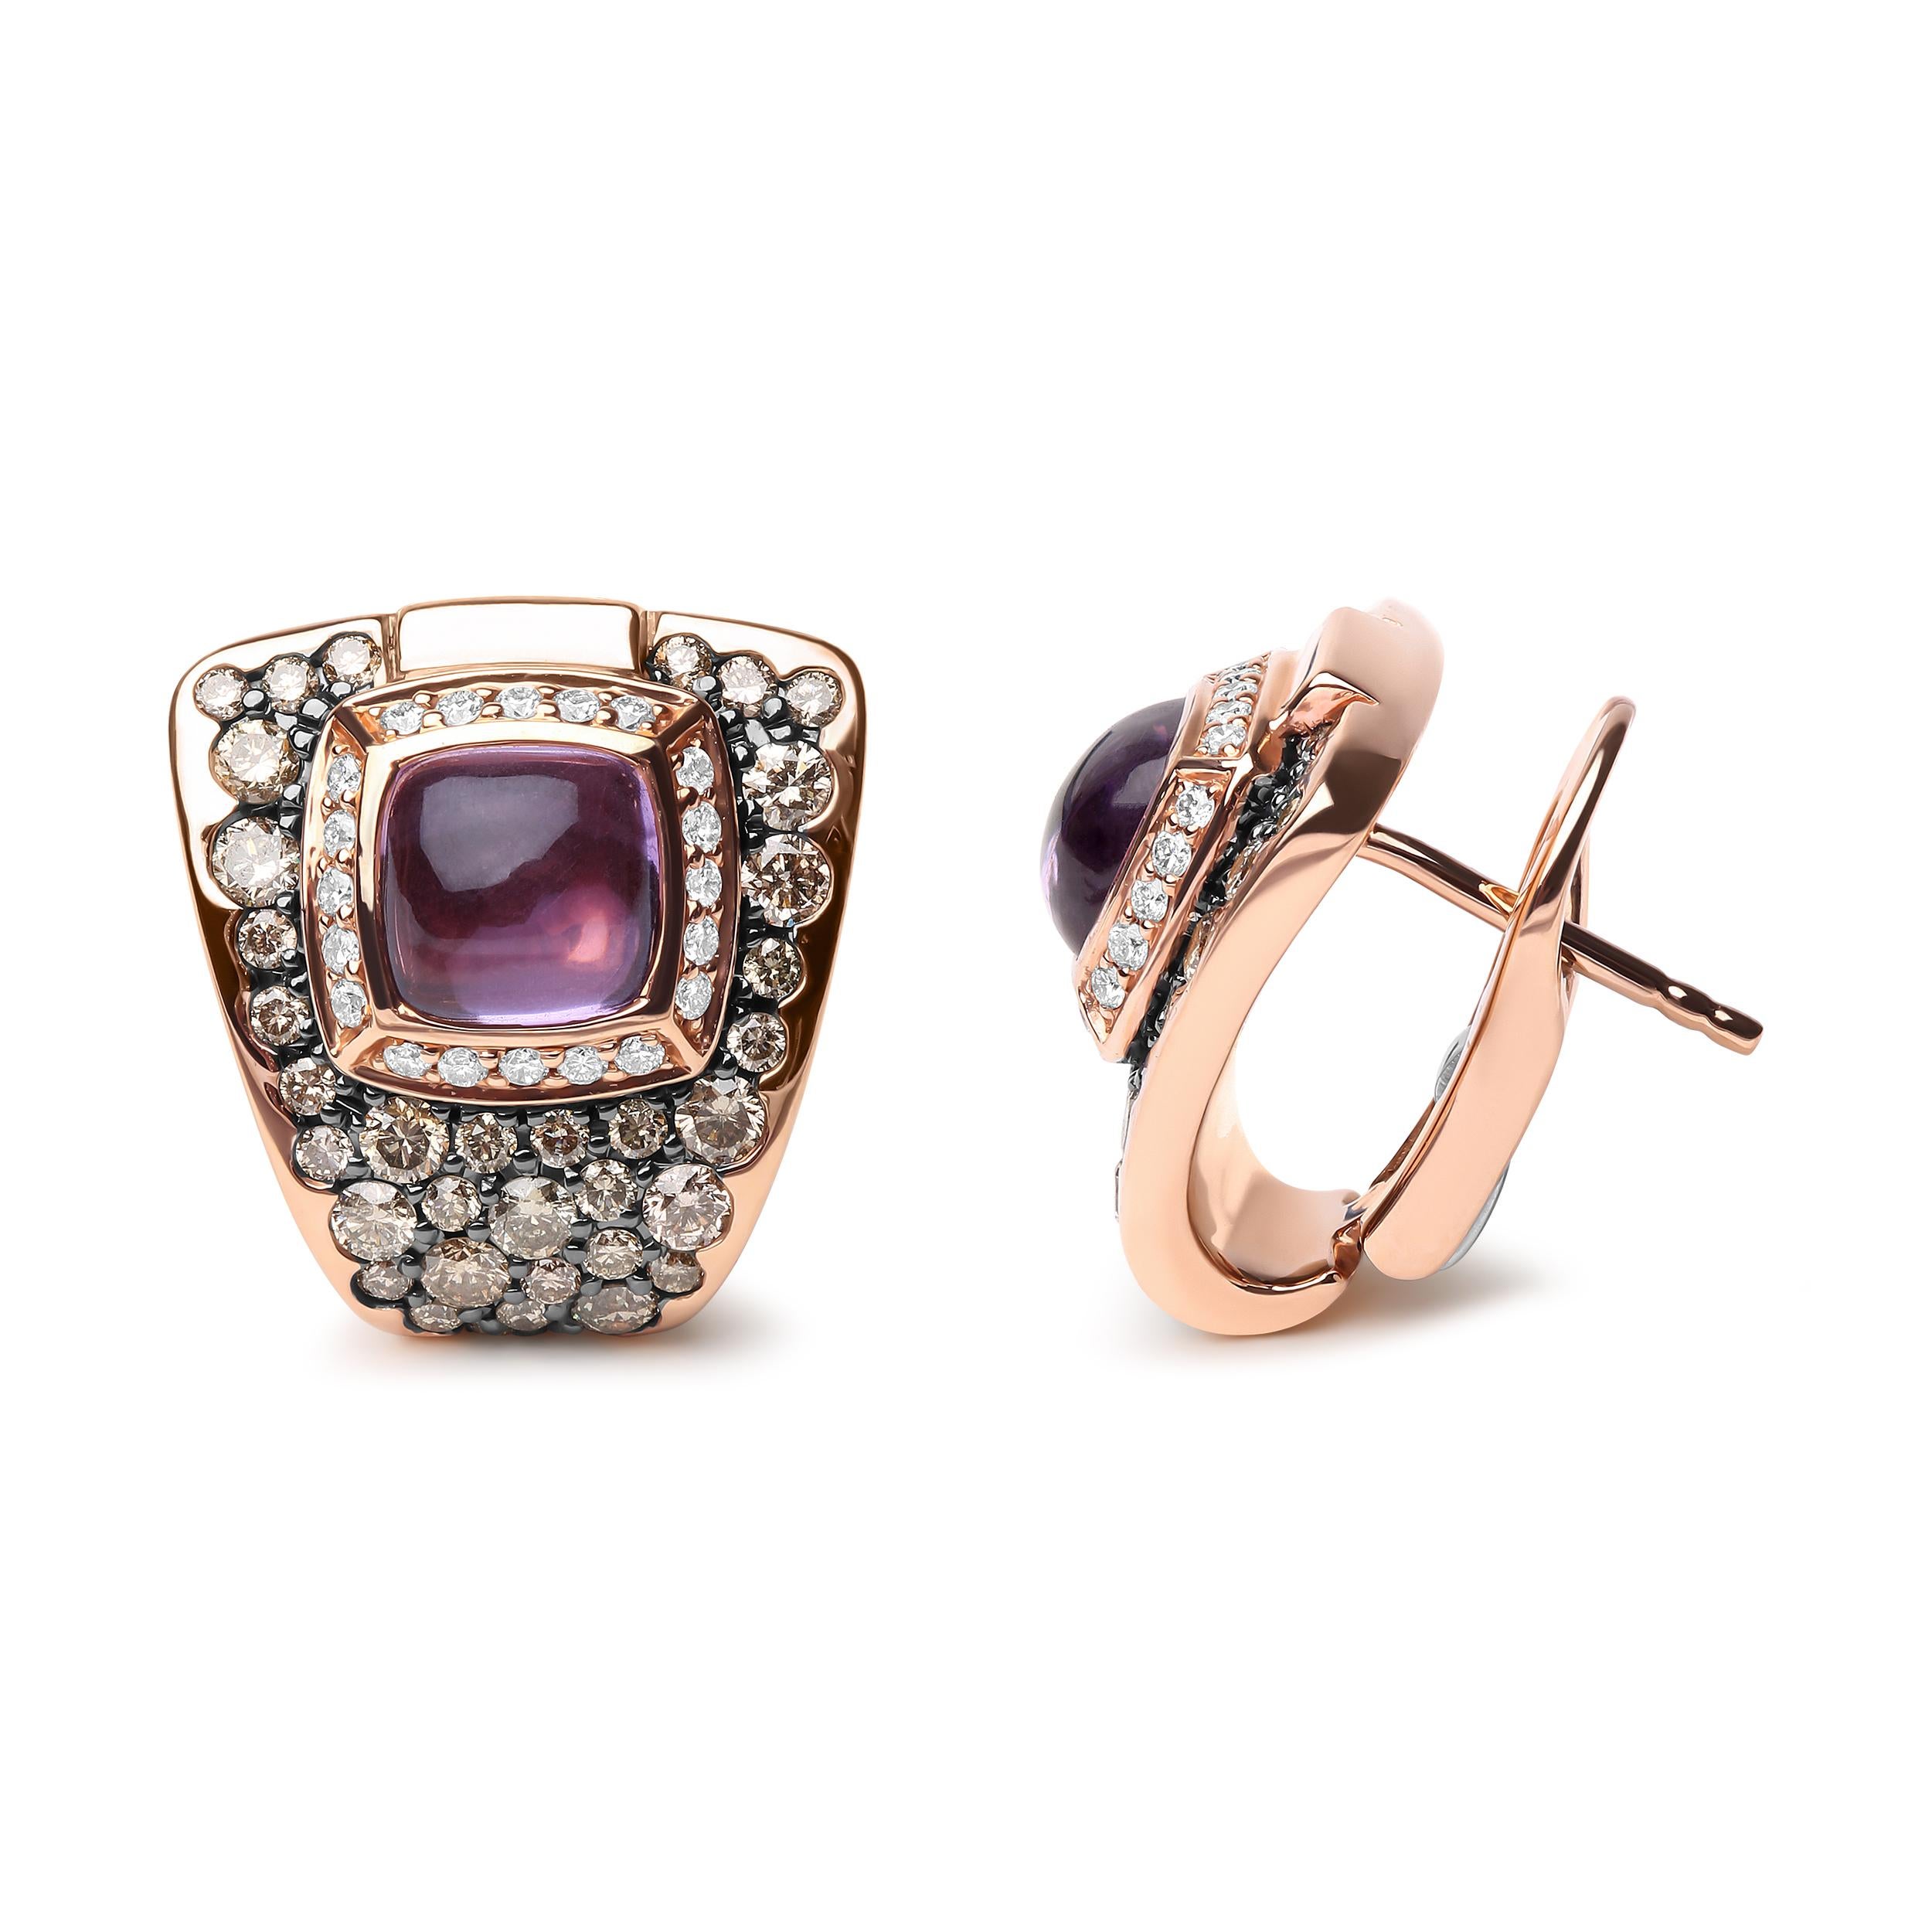 Contemporary 18K Rose Gold 1 1/2 Carat Diamond and Purple Amethyst Gemstone Stud Earrings For Sale